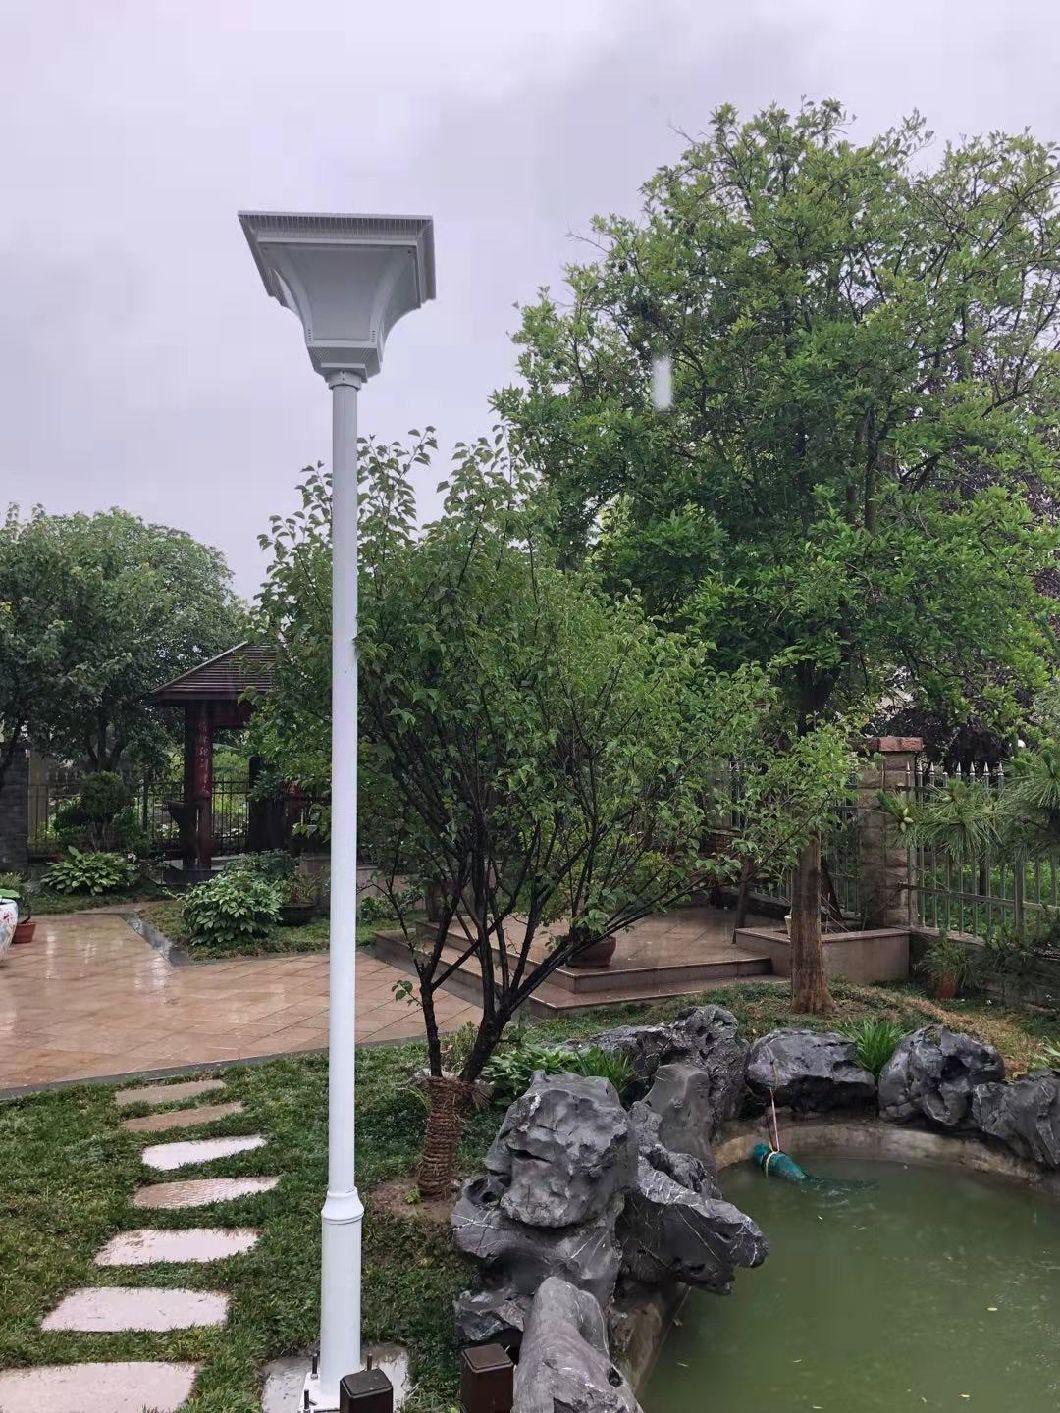 Quick Installation All in One Solar Light Lawn Waterproof Outdoor Garden LED Lamp Lights Lighting Decoration Energy Saving Power System Home Portable Light